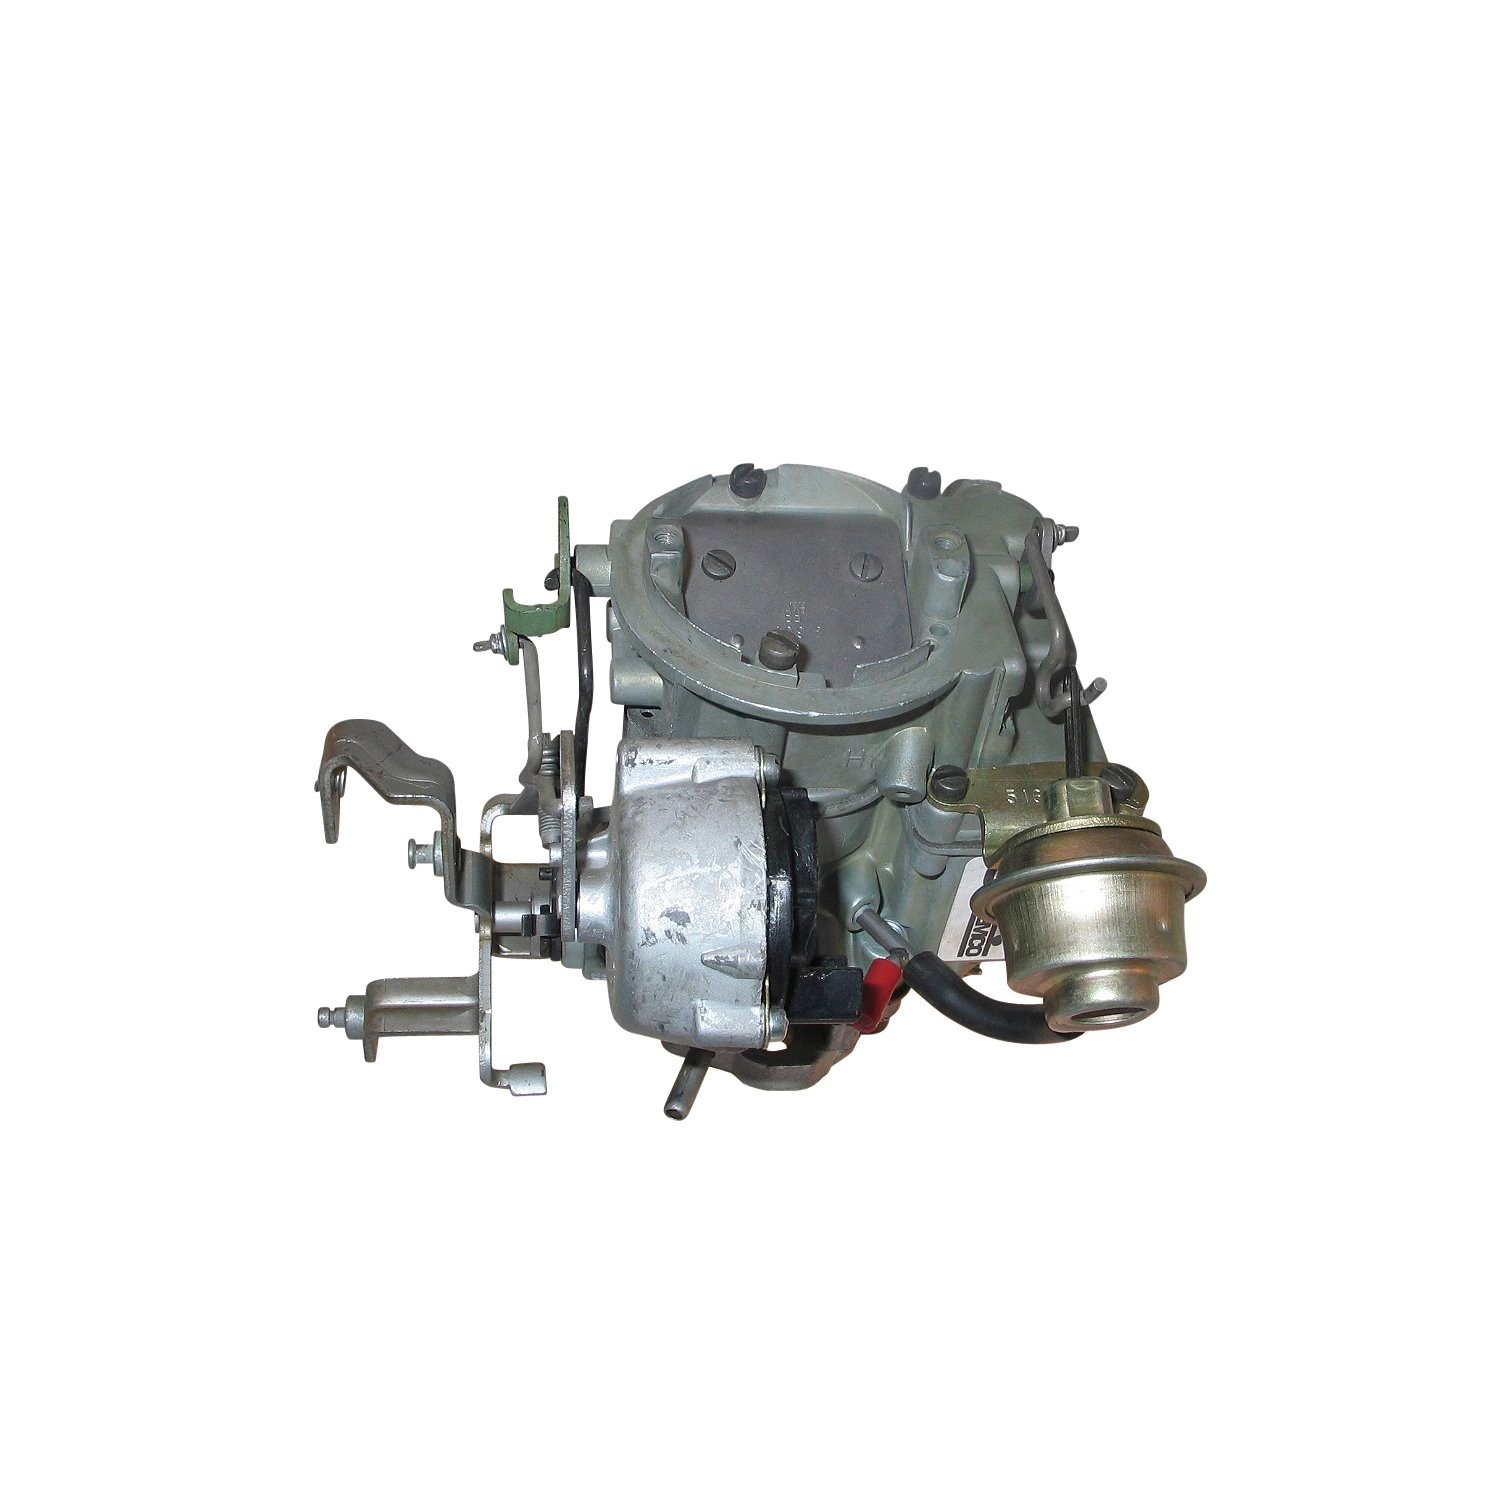 3-3576 Rochester Remanufactured Carburetor, 1ME, Heavy Duty-Style